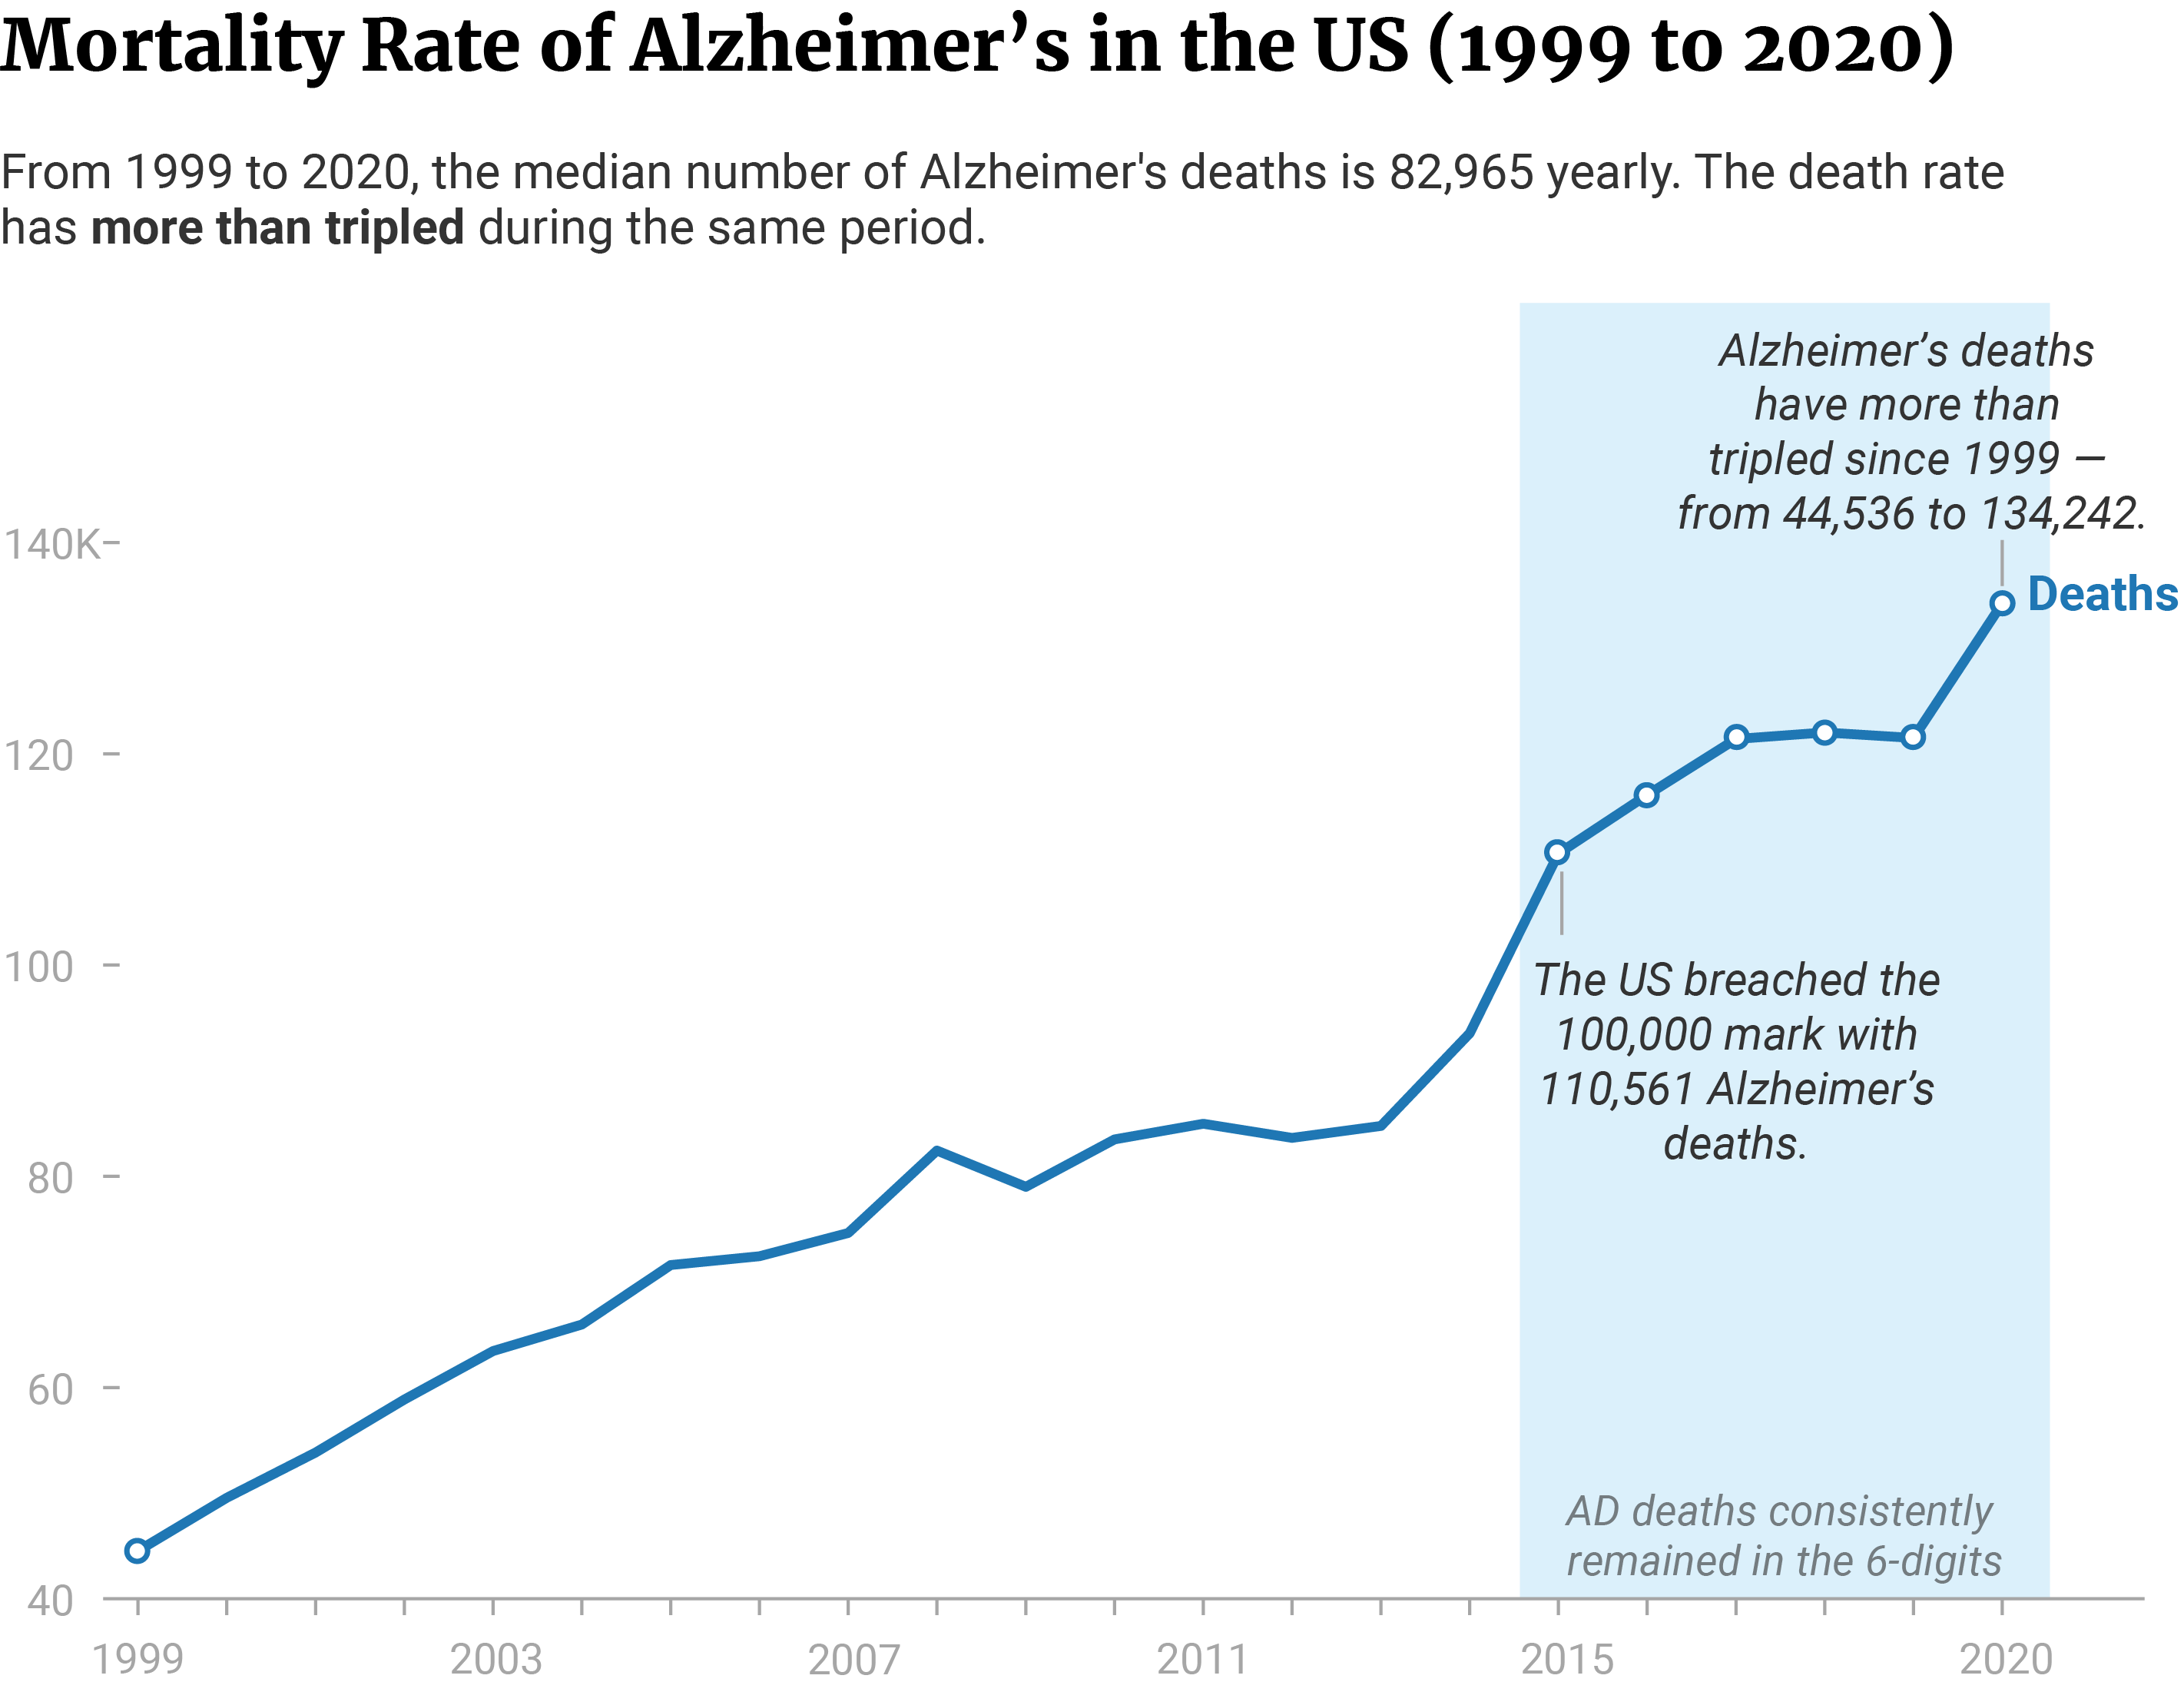 Line chart showing Alzheimer’s deaths tripled in number from 44,536 in 1999 to 134,242 in 2020, with an annotation in 2015 saying that the US breached its 100,000 mark with 110,561 deaths.